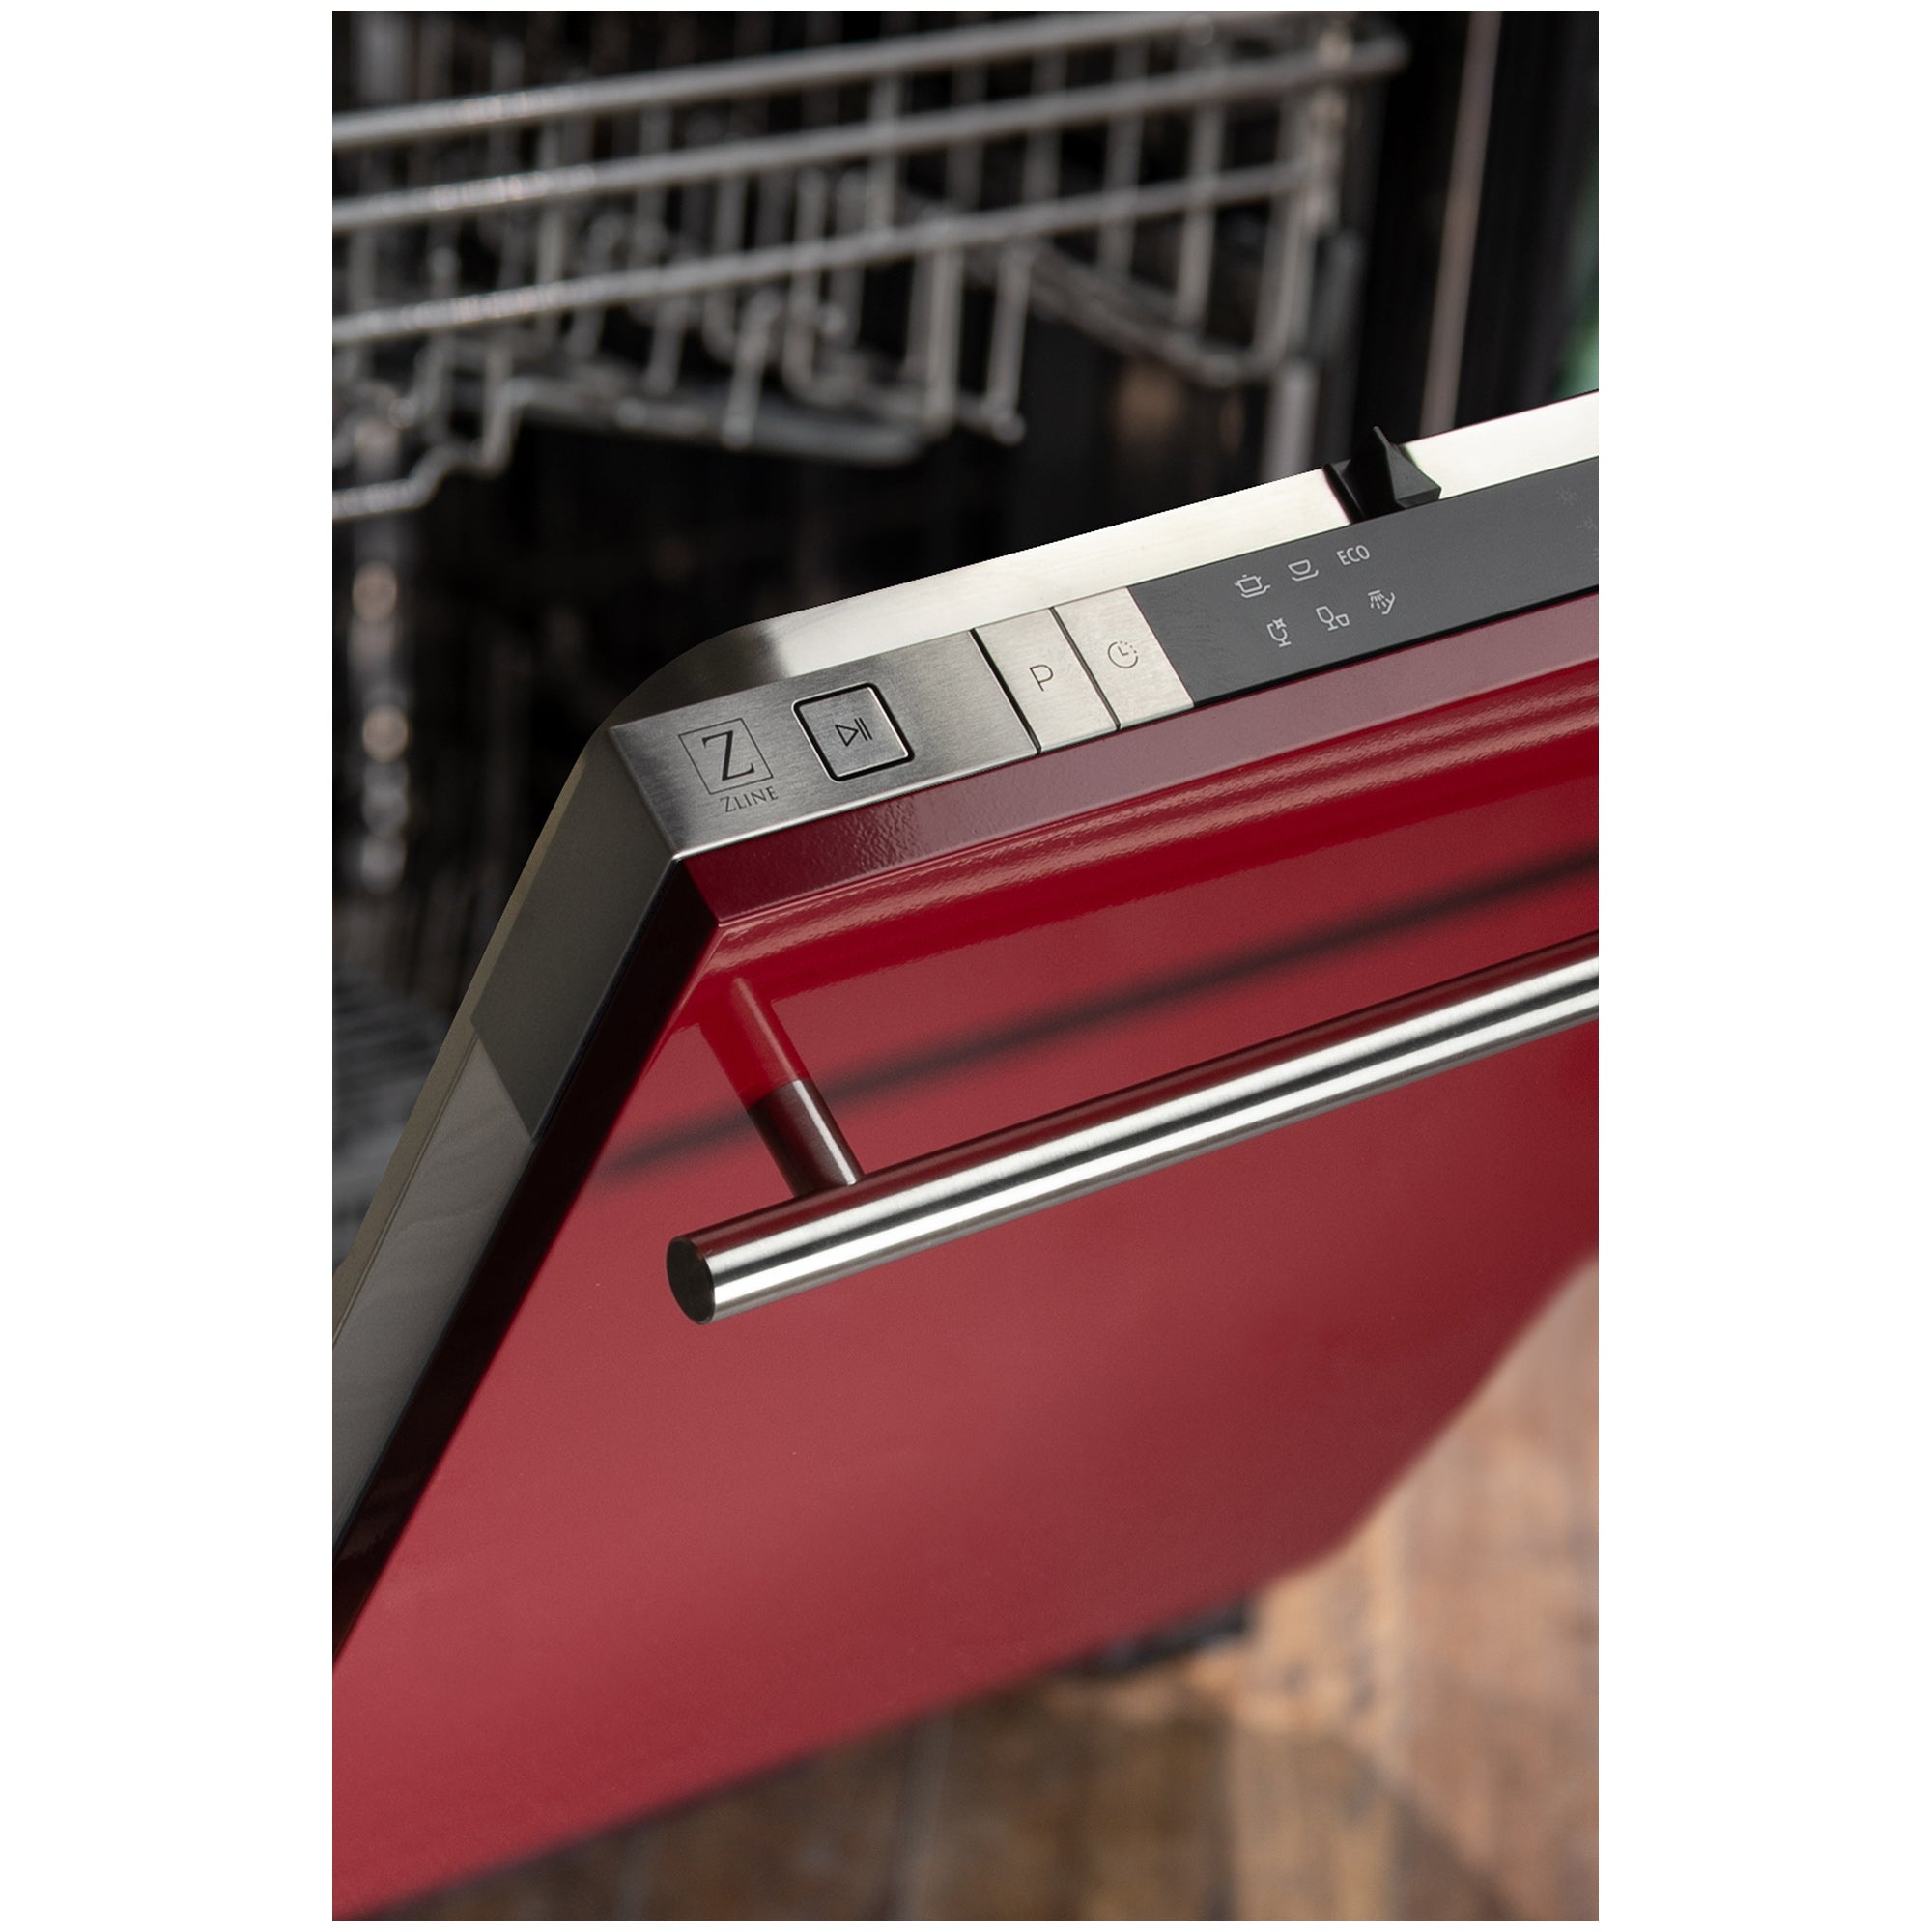 ZLINE 18 in. Compact Red Gloss Top Control Dishwasher with Stainless Steel Tub and Modern Style Handle, 52dBa (DW-RG-H-18)